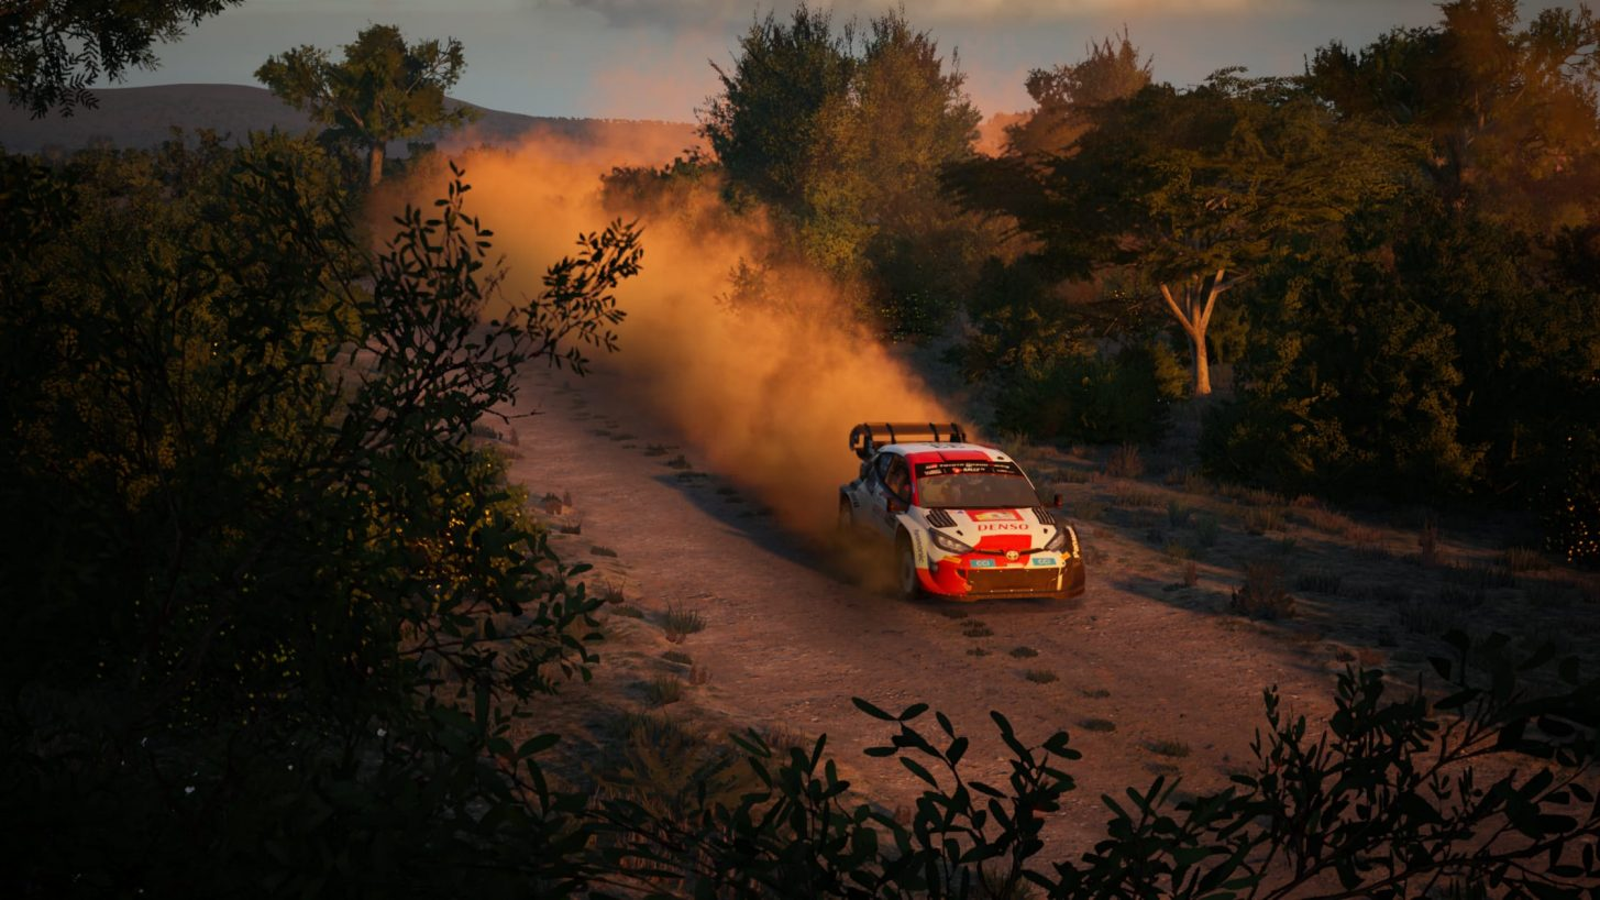 WRC Generations PS5: Which features will be available on PlayStation 5?